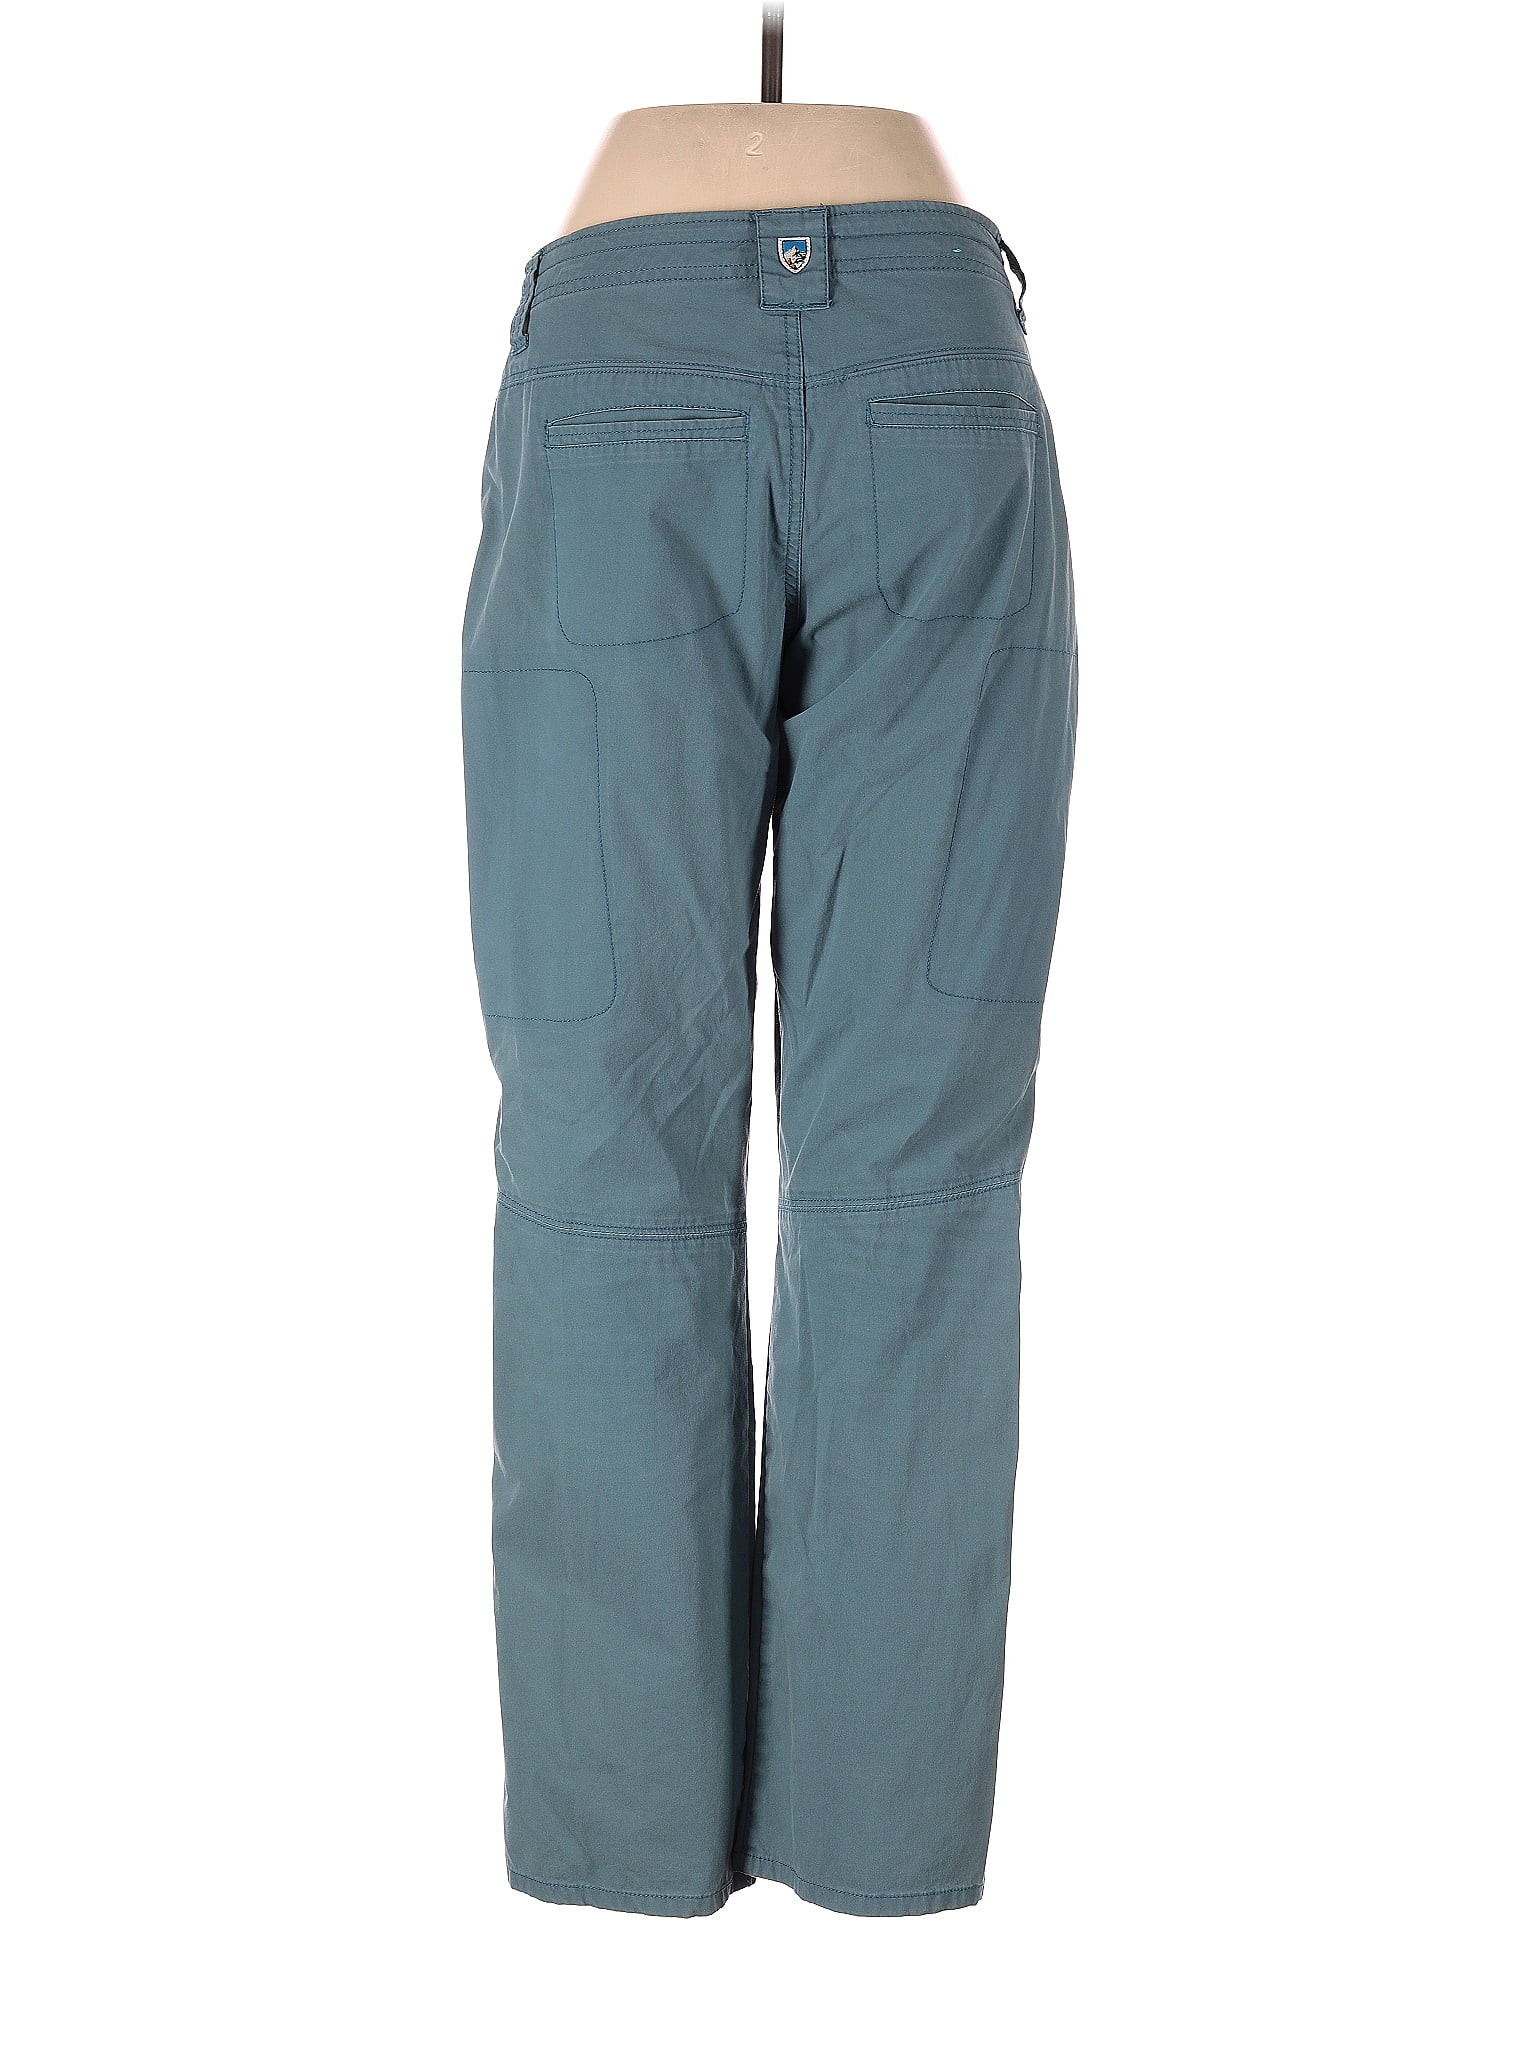 Kuhl Women's Pants On Sale Up To 90% Off Retail